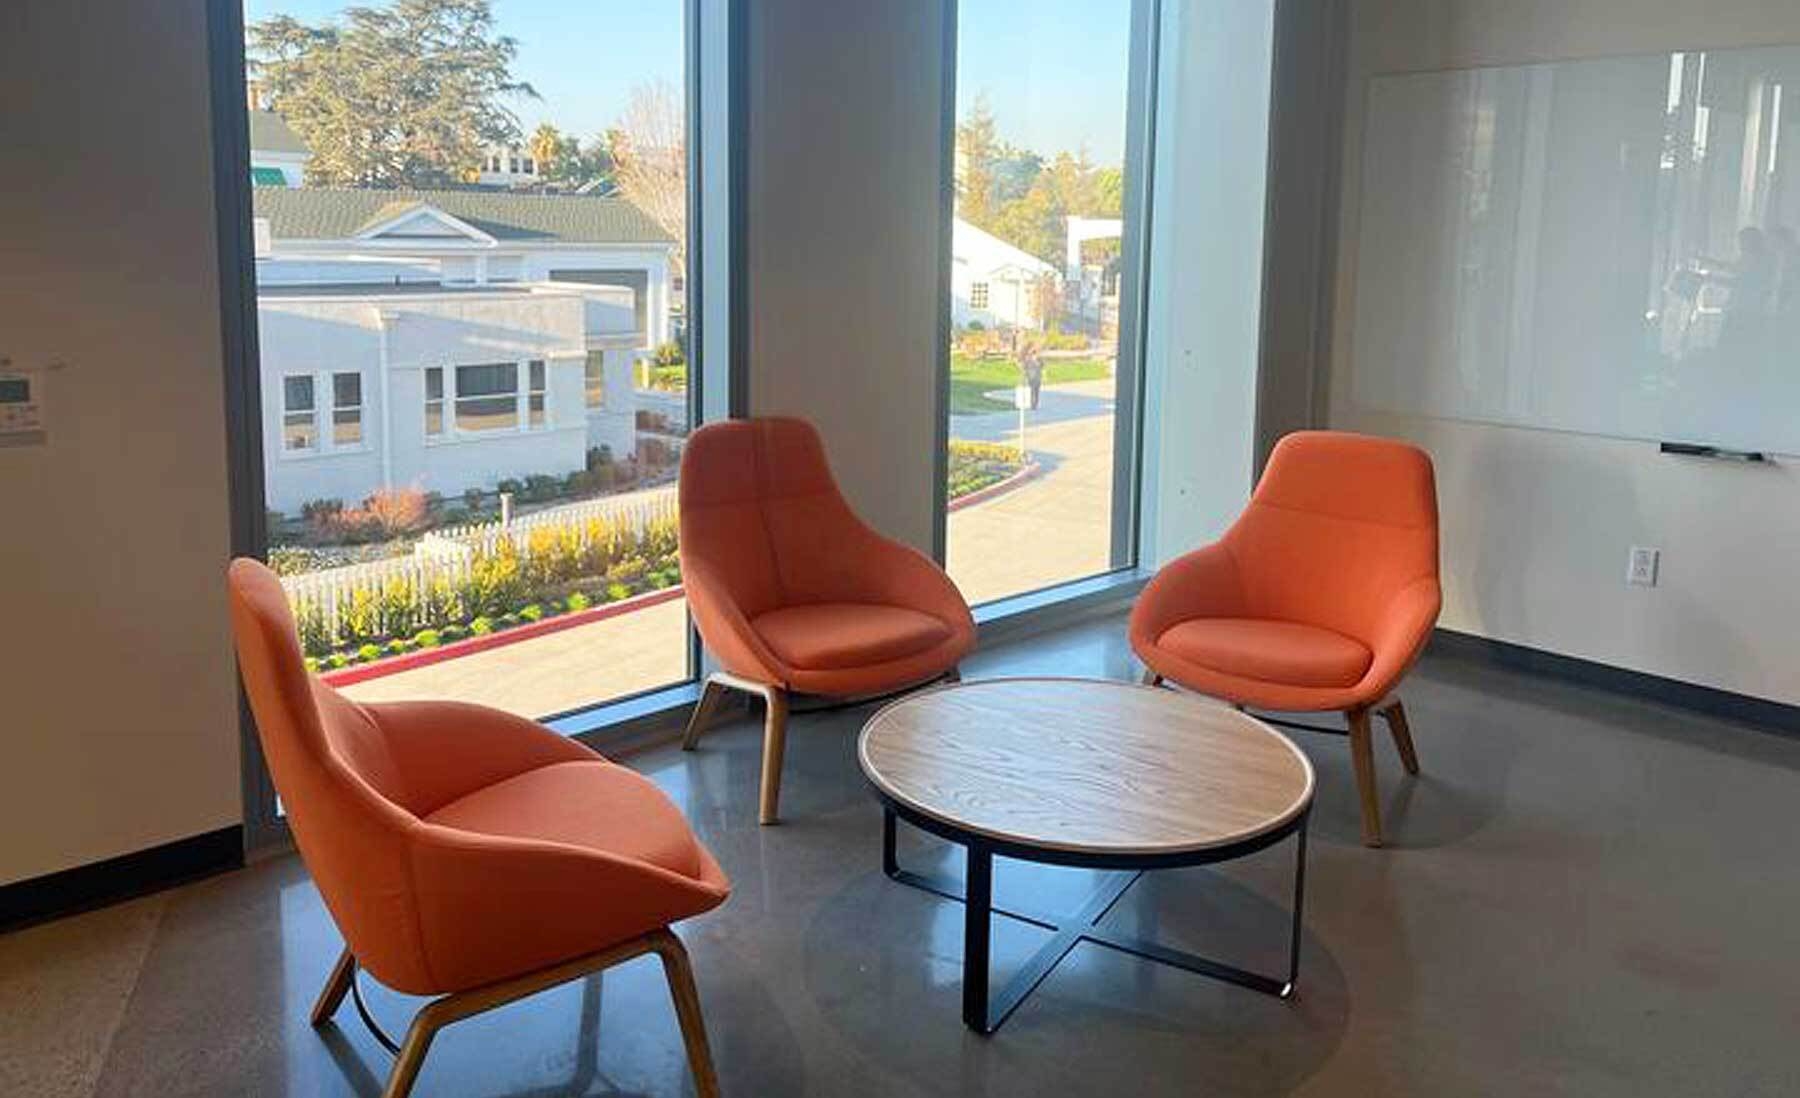 An image of a sitting area with three orange chairs and a table. You can see the Culver Studios mansion out the window. 